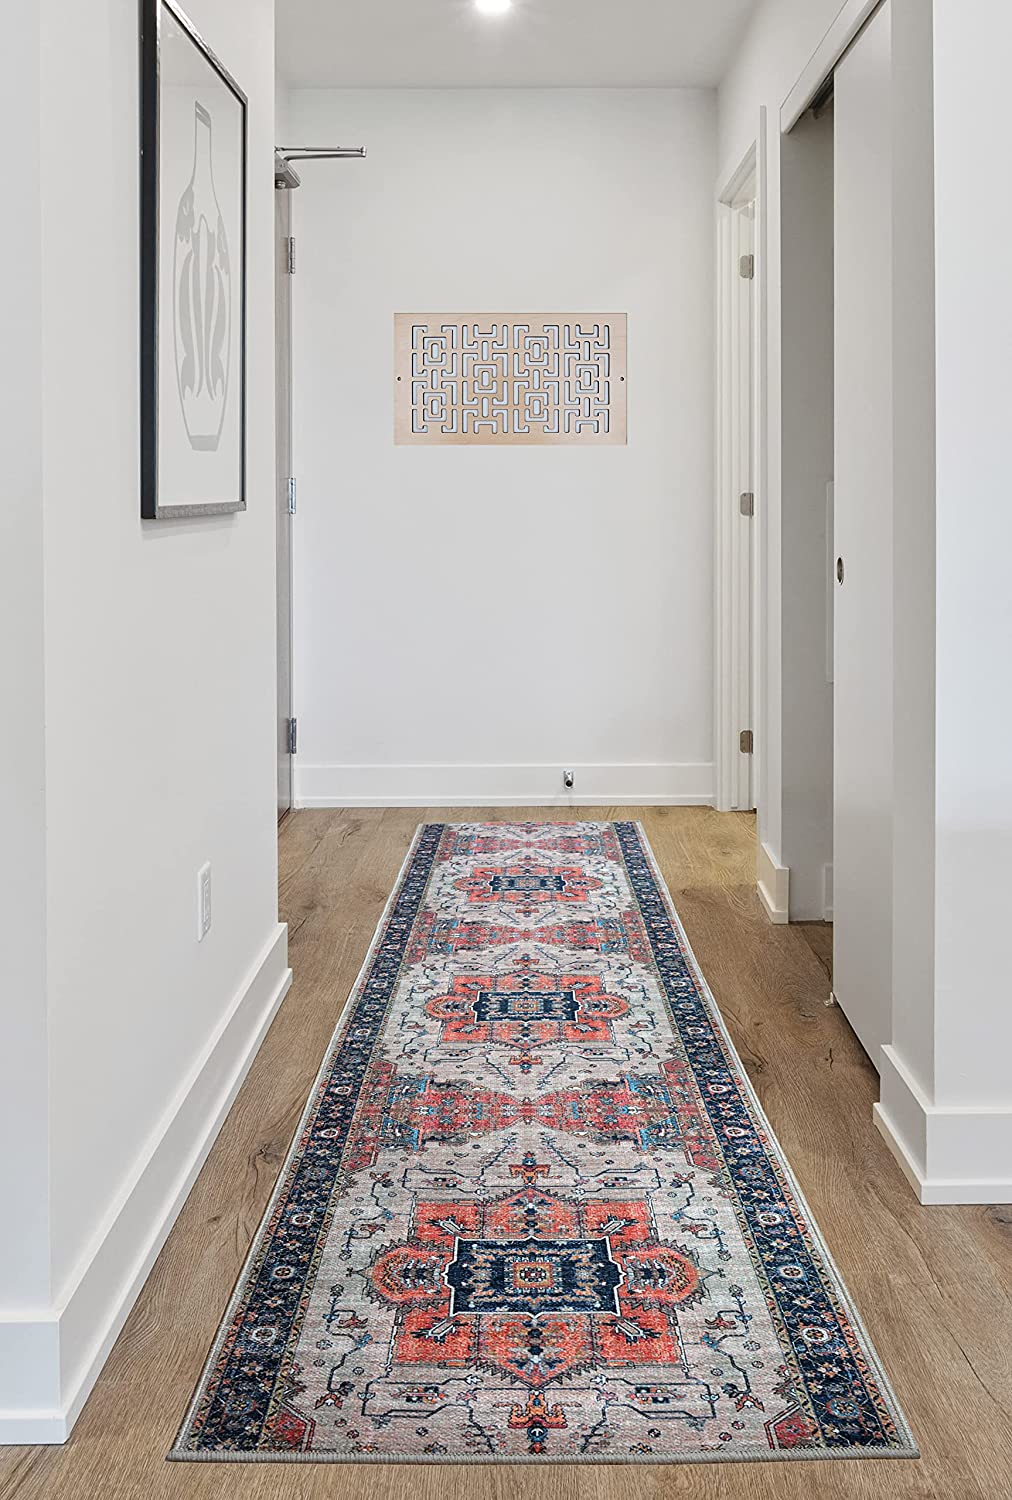 Image Home Collection Custom Size Runner Rug Oriental Serapi Medallion Design MultiColor Skid Resistant Cut To Size Rug Runners Customize By Feet and 25 in Width